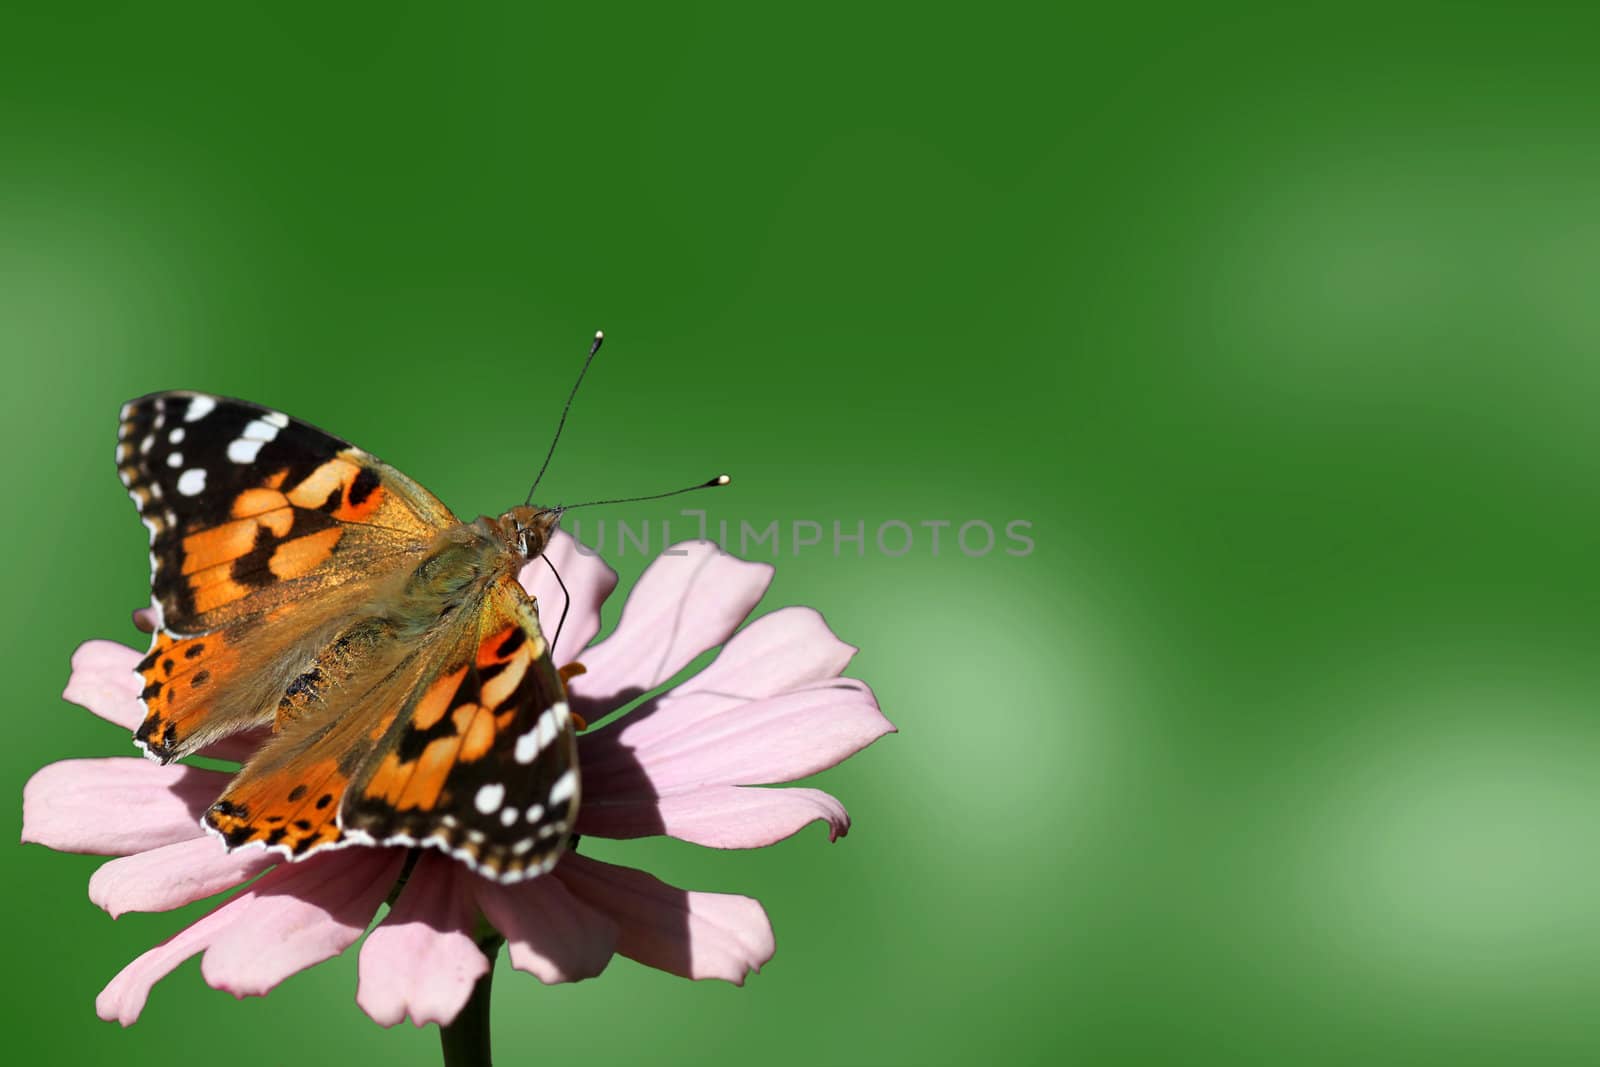 butterfly (Painted Lady) on flower over green background